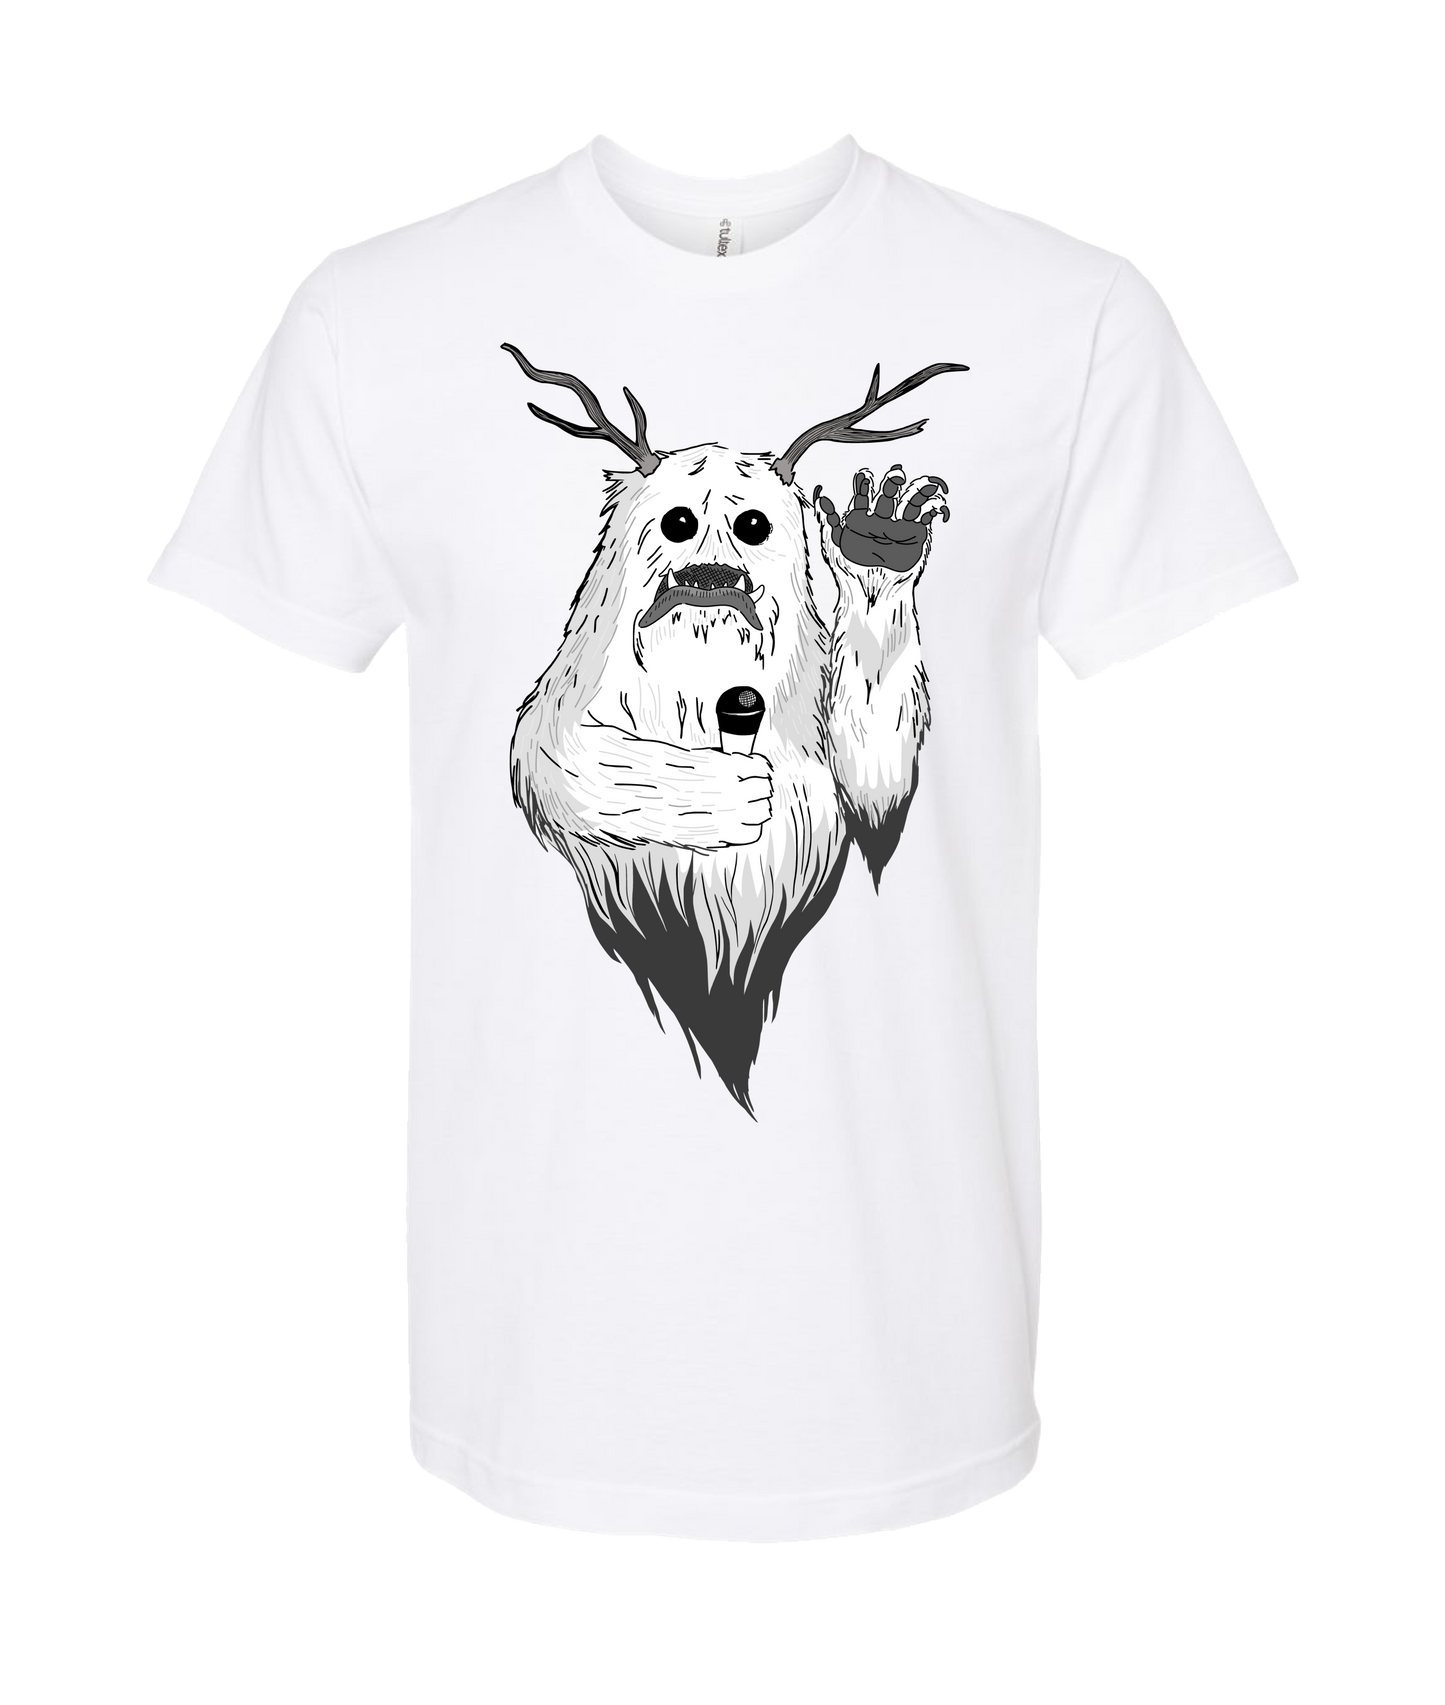 Sparks Across Darkness - Sparky - White T Shirt